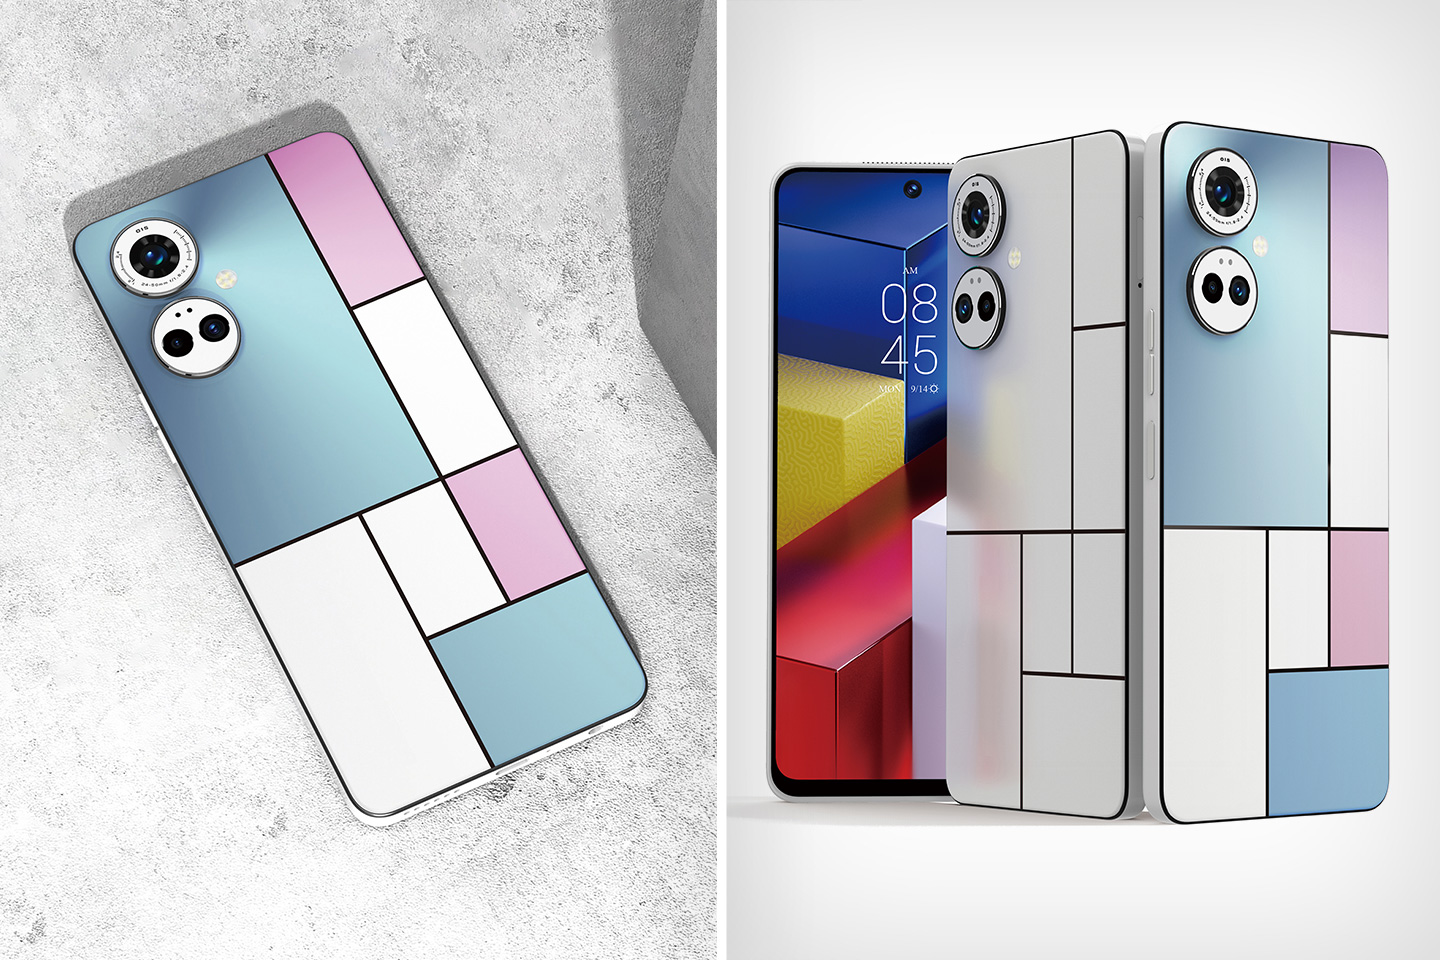 #No this isn’t a modular Project Ara phone – its grid-based design was inspired Manet and Mondrian